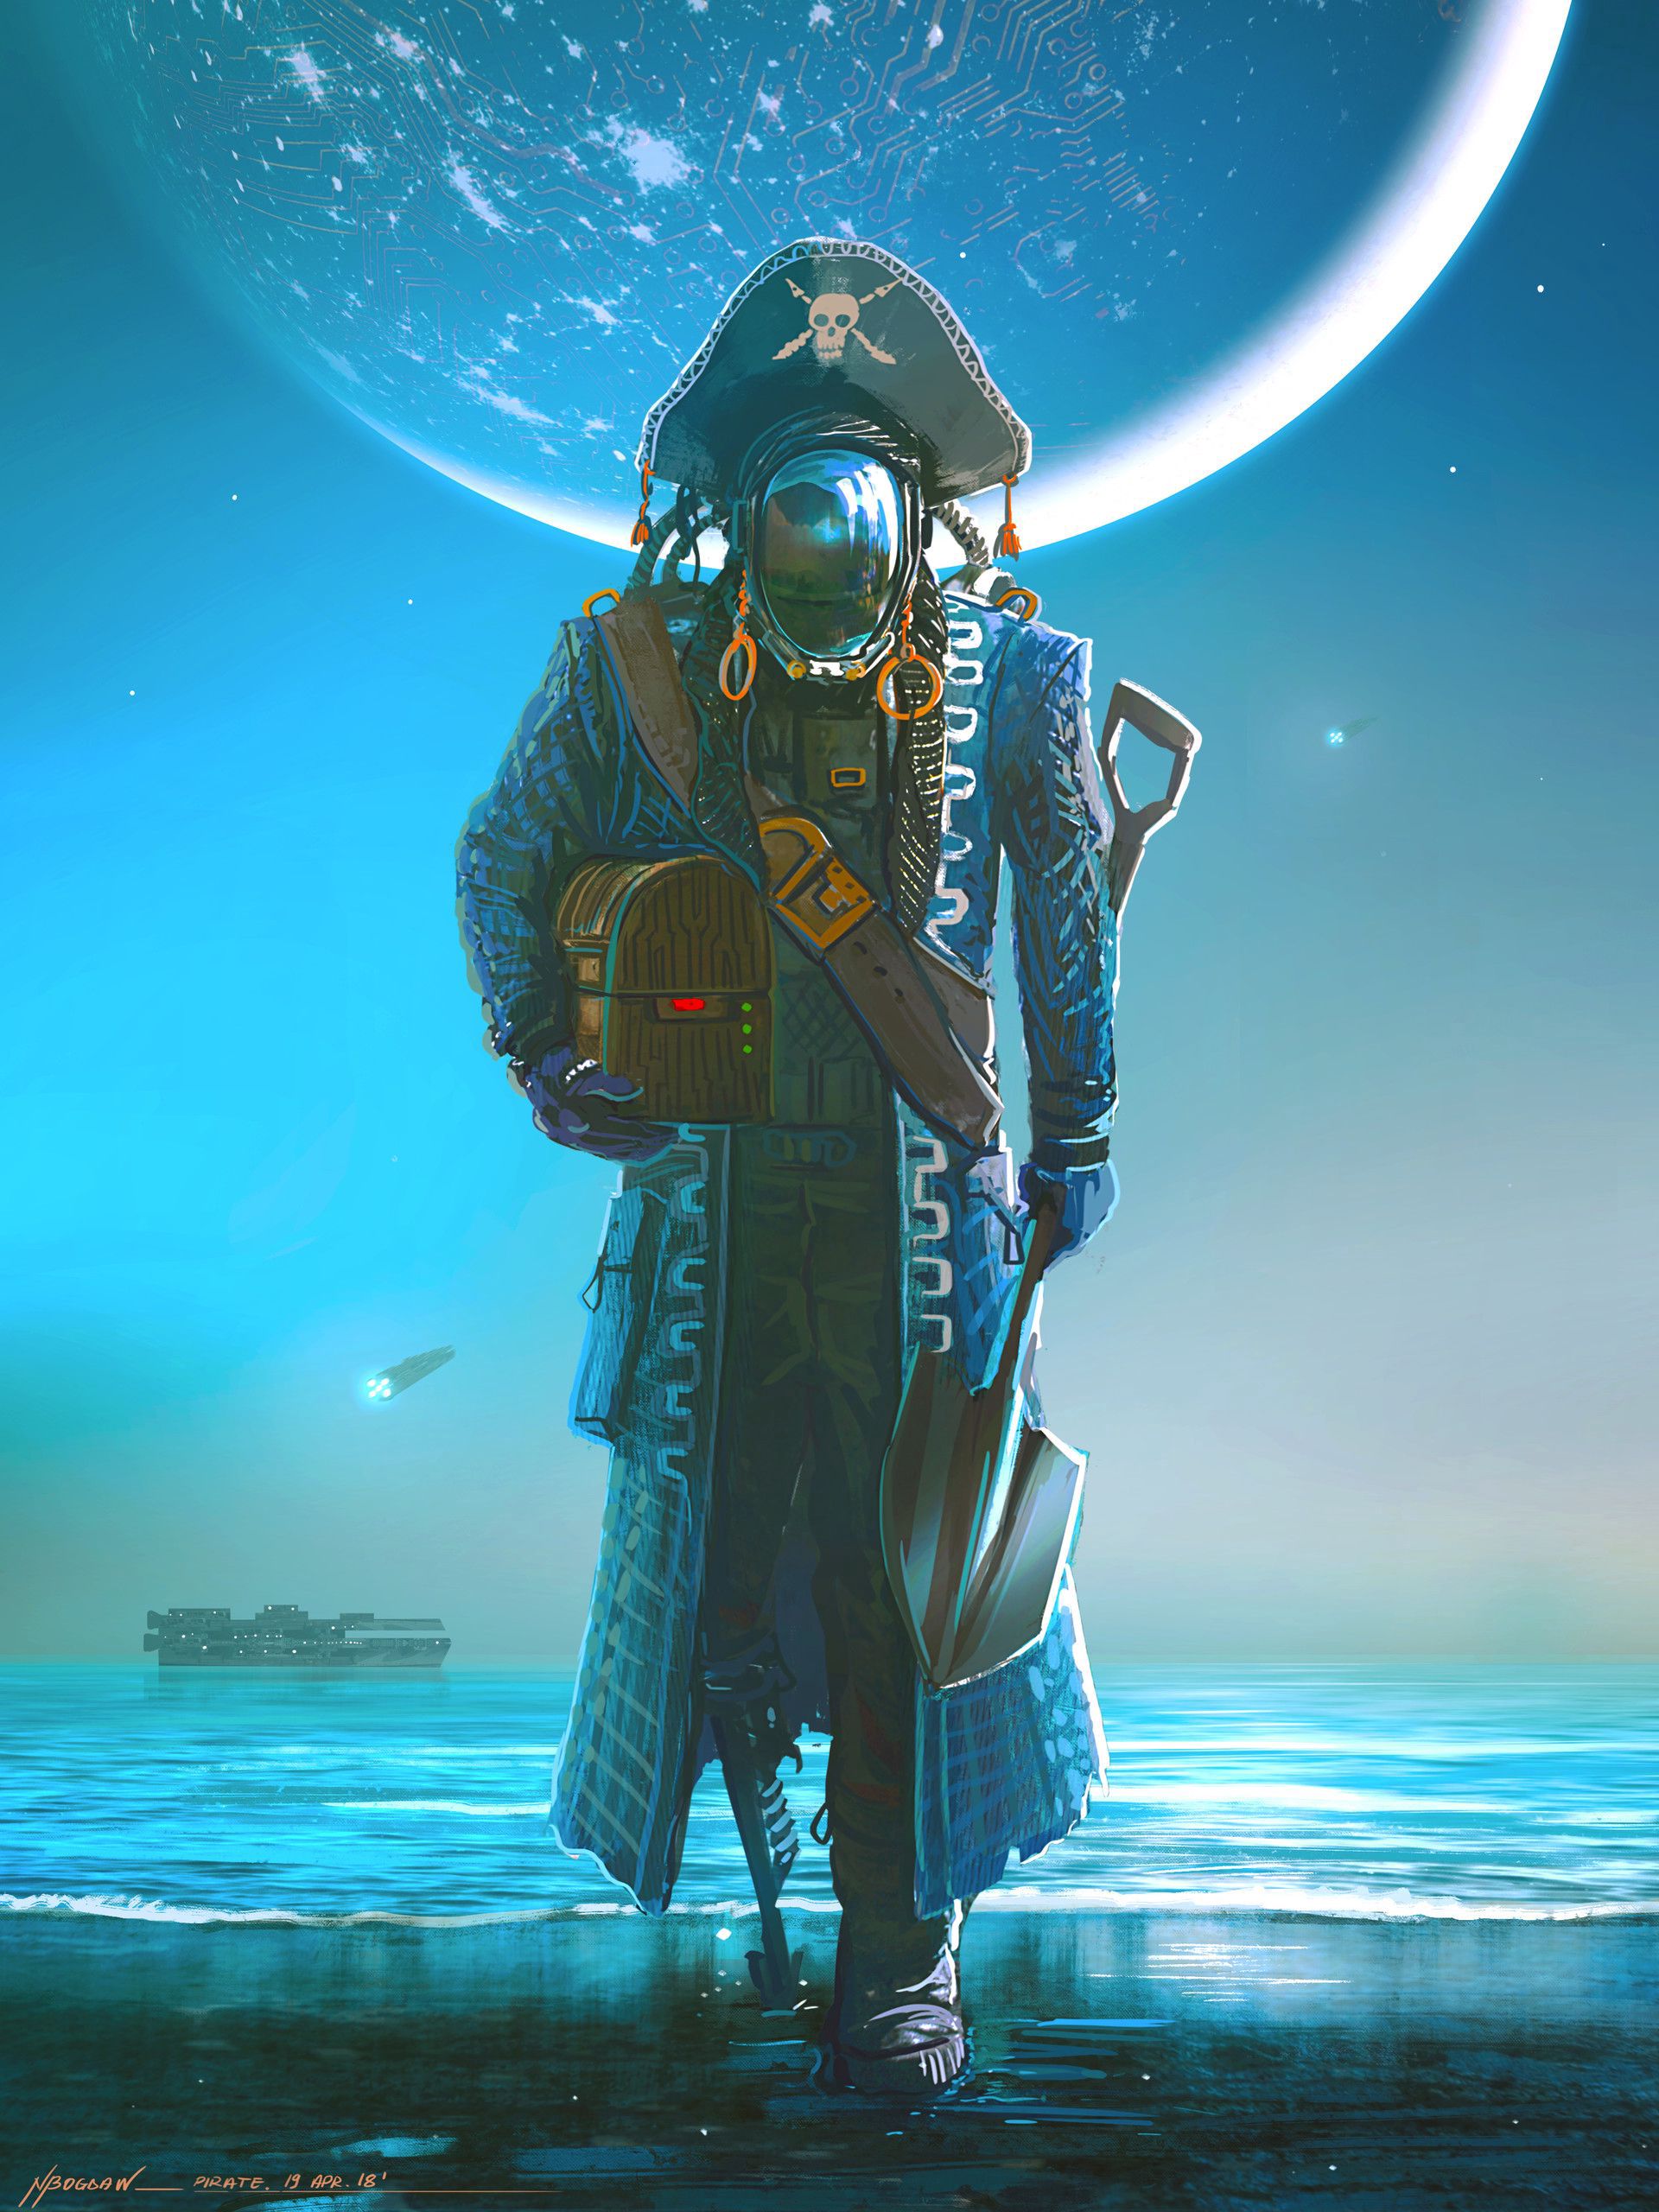 Popular Pirate Image for Phone